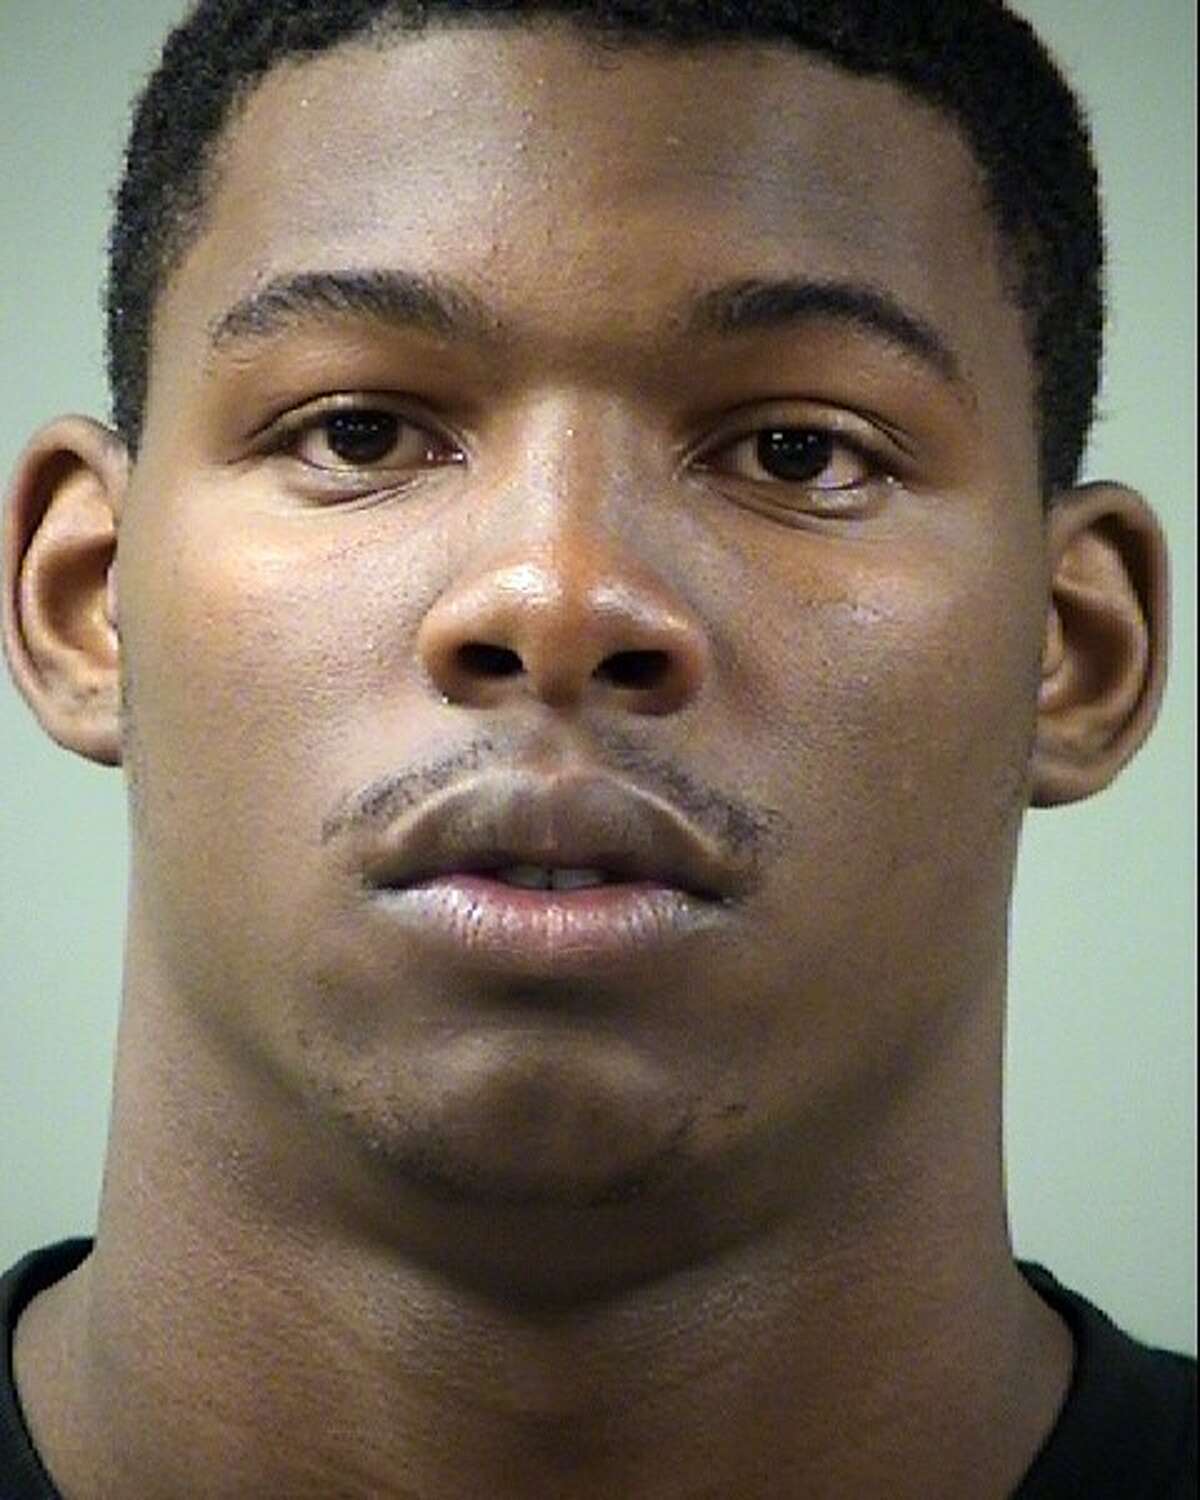 Alton Robinson,a former Judson High School football player and recent Texas A&M Aggies signee, was arrested on robbery charges Tuesday Feb. 16, 2016.